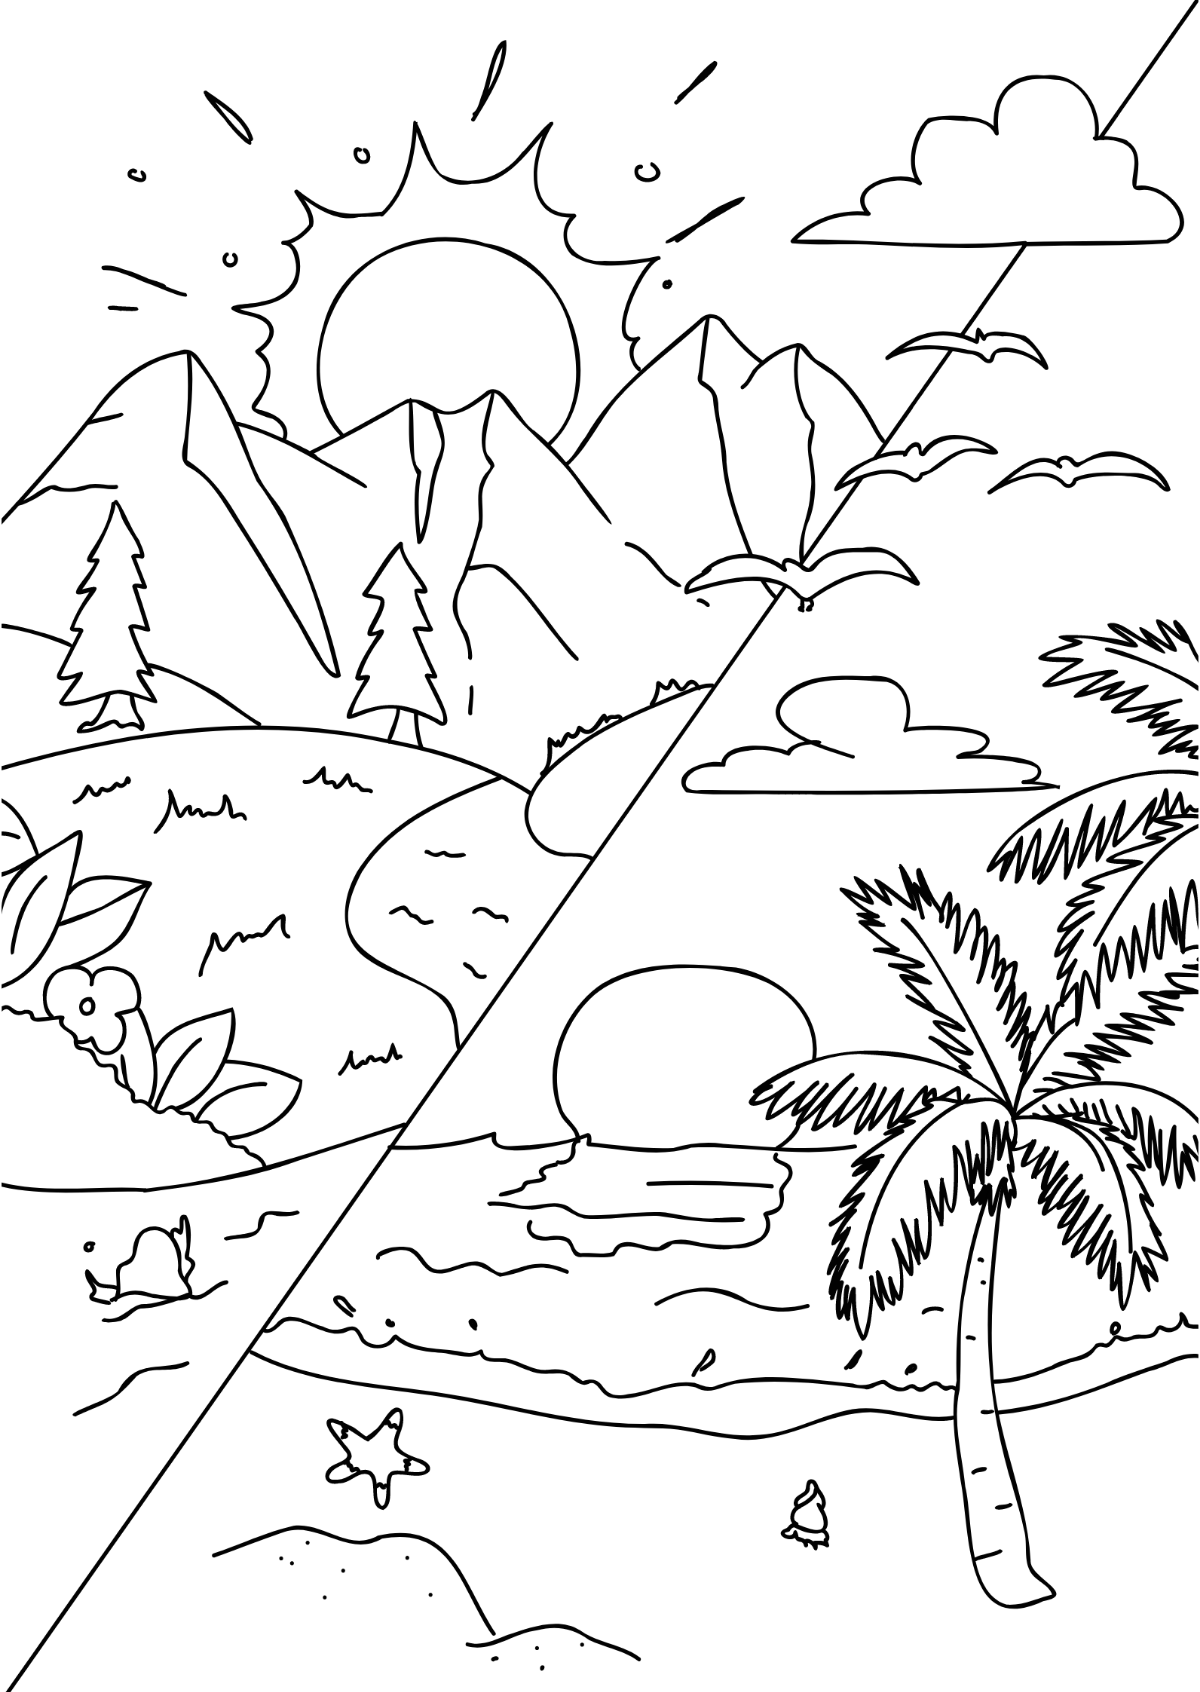 Nature Drawing Template